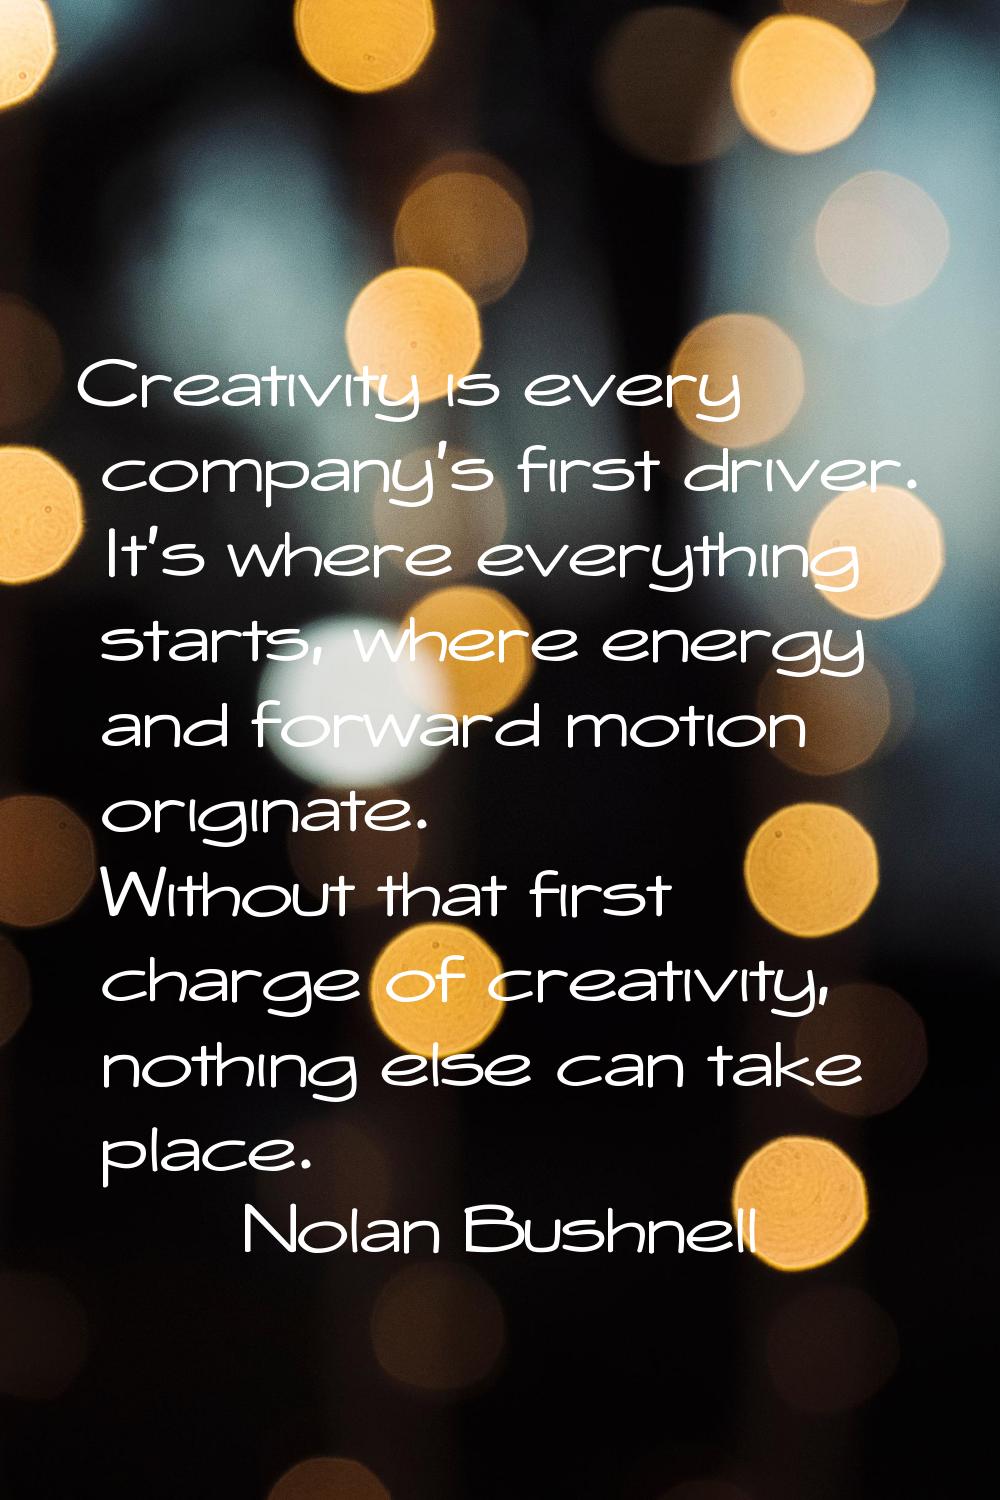 Creativity is every company's first driver. It's where everything starts, where energy and forward 